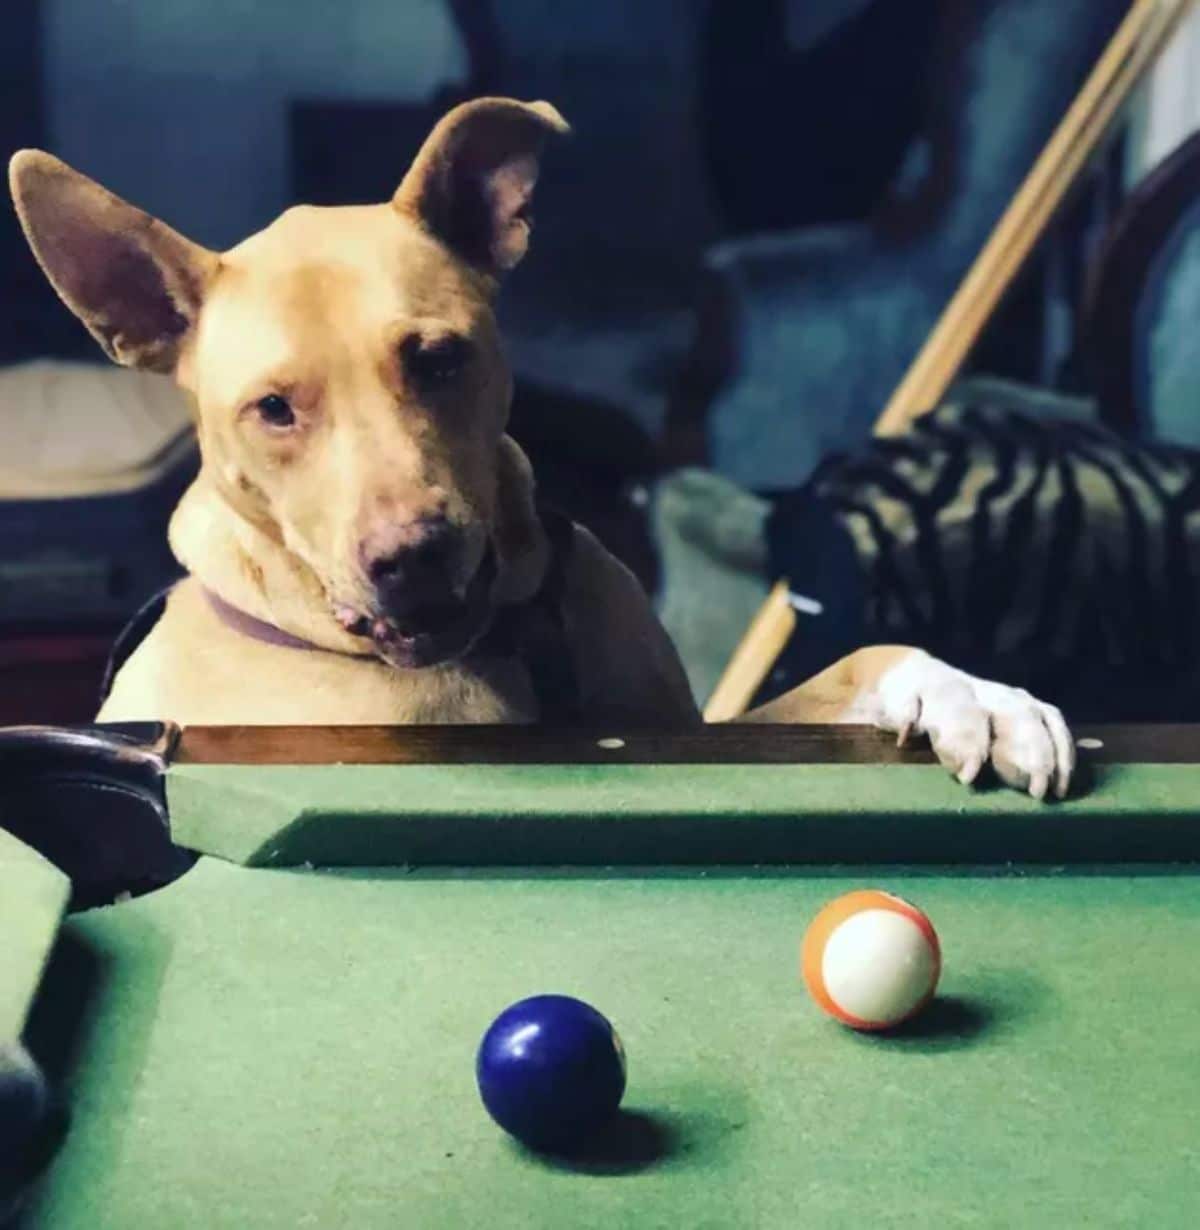 brown dog next to a green pool table with a white paw on the table and a pool cue next to it